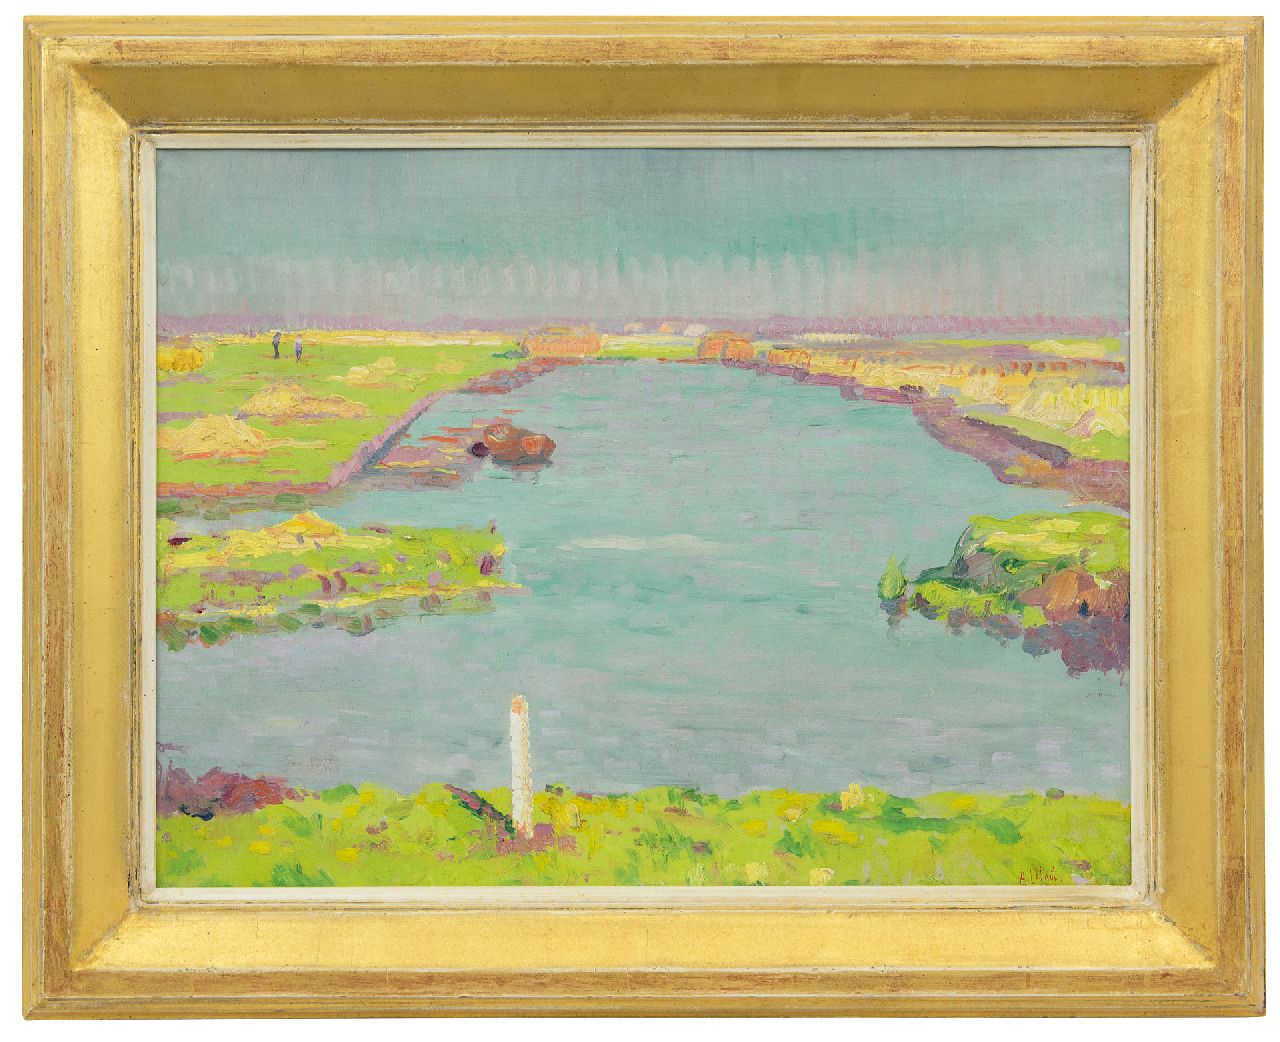 Colnot A.J.G.  | 'Arnout' Jacobus Gustaaf Colnot, A luministic polder landscape near Bergen, oil on canvas 49.6 x 62.9 cm, signed l.r. and painted ca. 1909